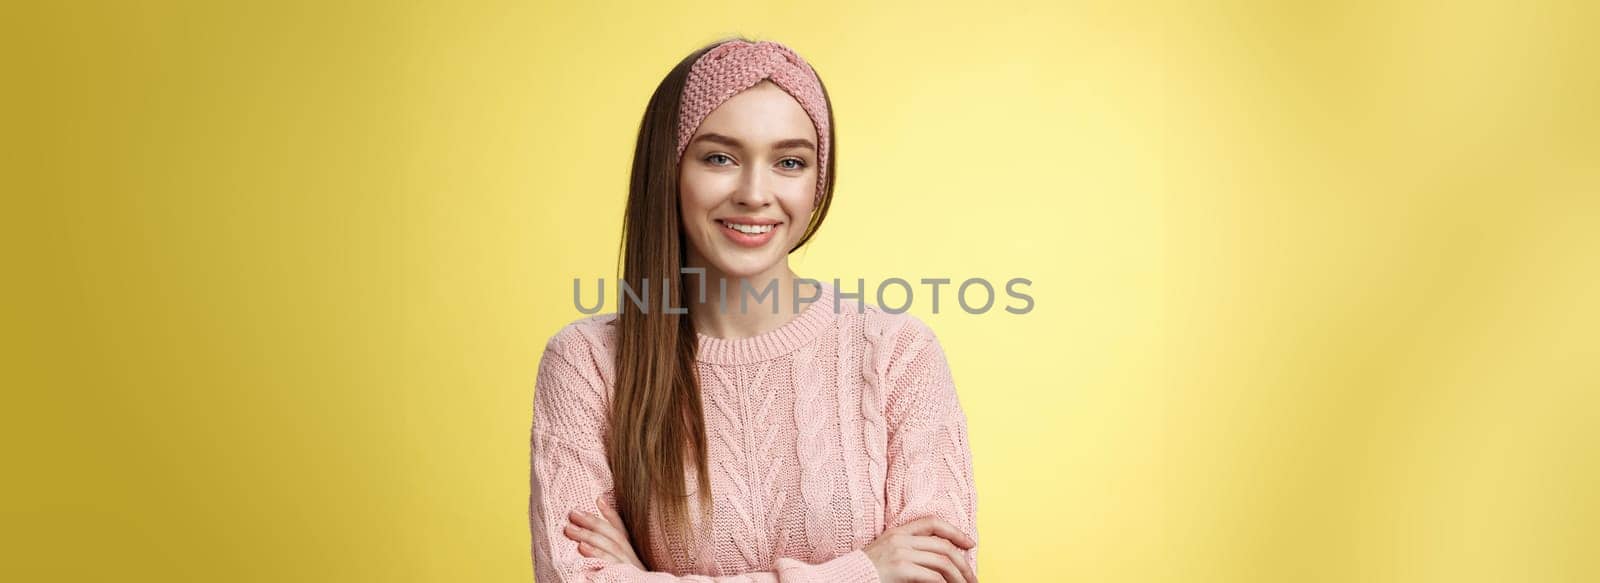 Waist-up shot of confident creative joyful cute european female model in knitted pink sweater, headband, cross arms self-assured, satisfied, smiling pleased and motivated, looking delighted.